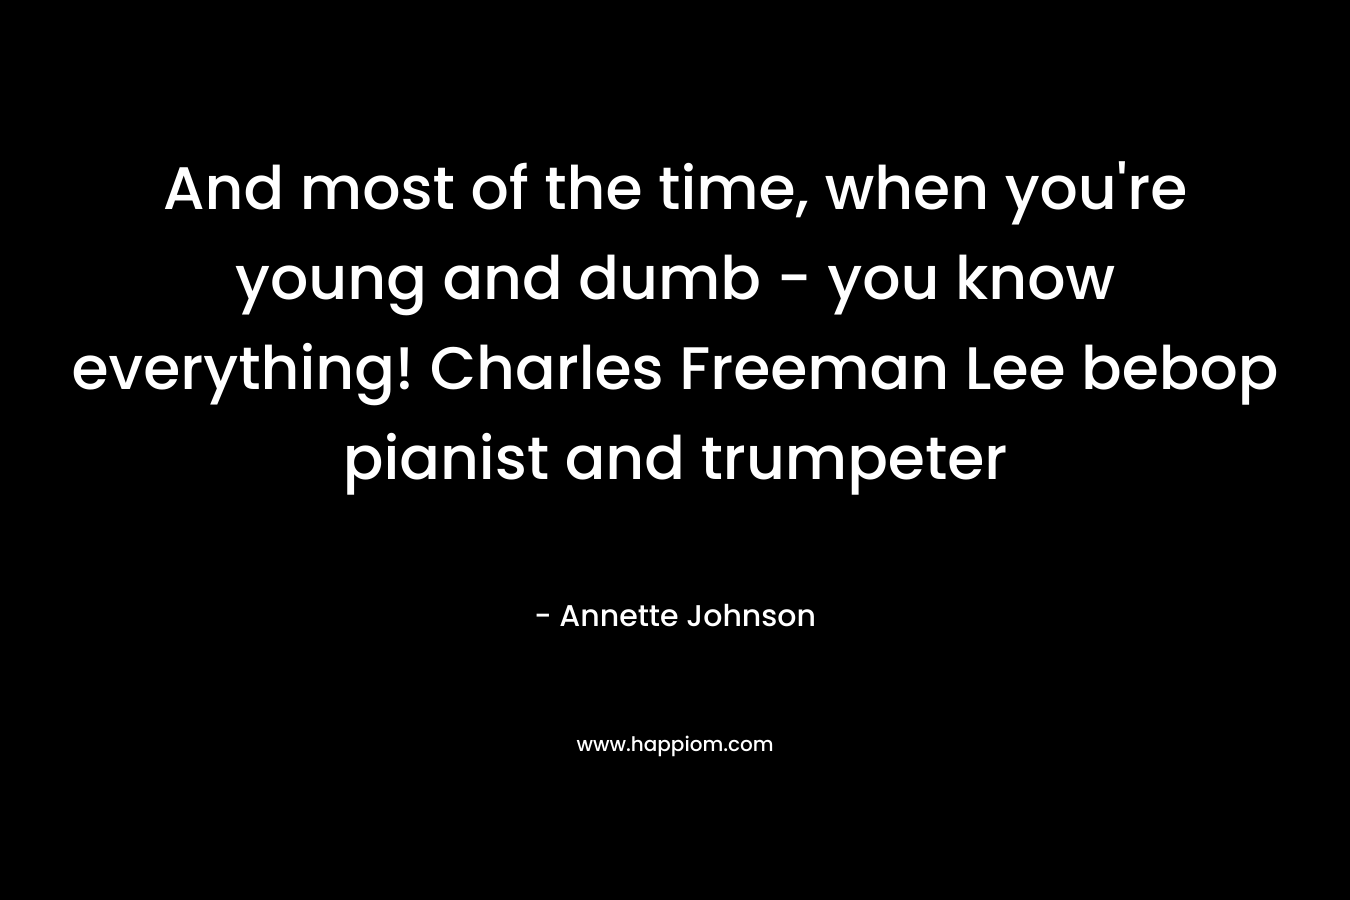 And most of the time, when you’re young and dumb – you know everything! Charles Freeman Lee bebop pianist and trumpeter – Annette Johnson